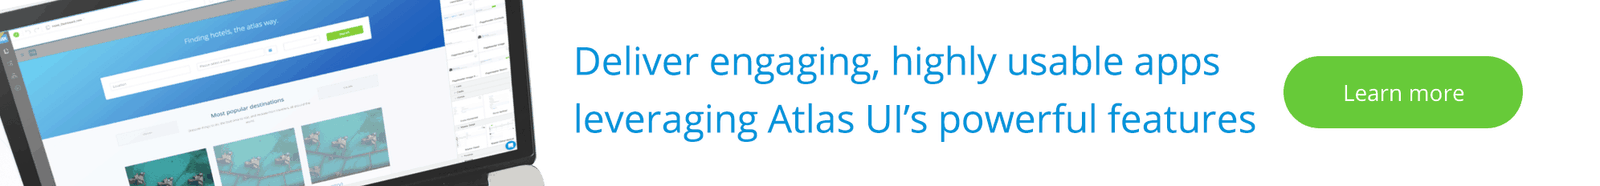 Learn more about Atlas UI